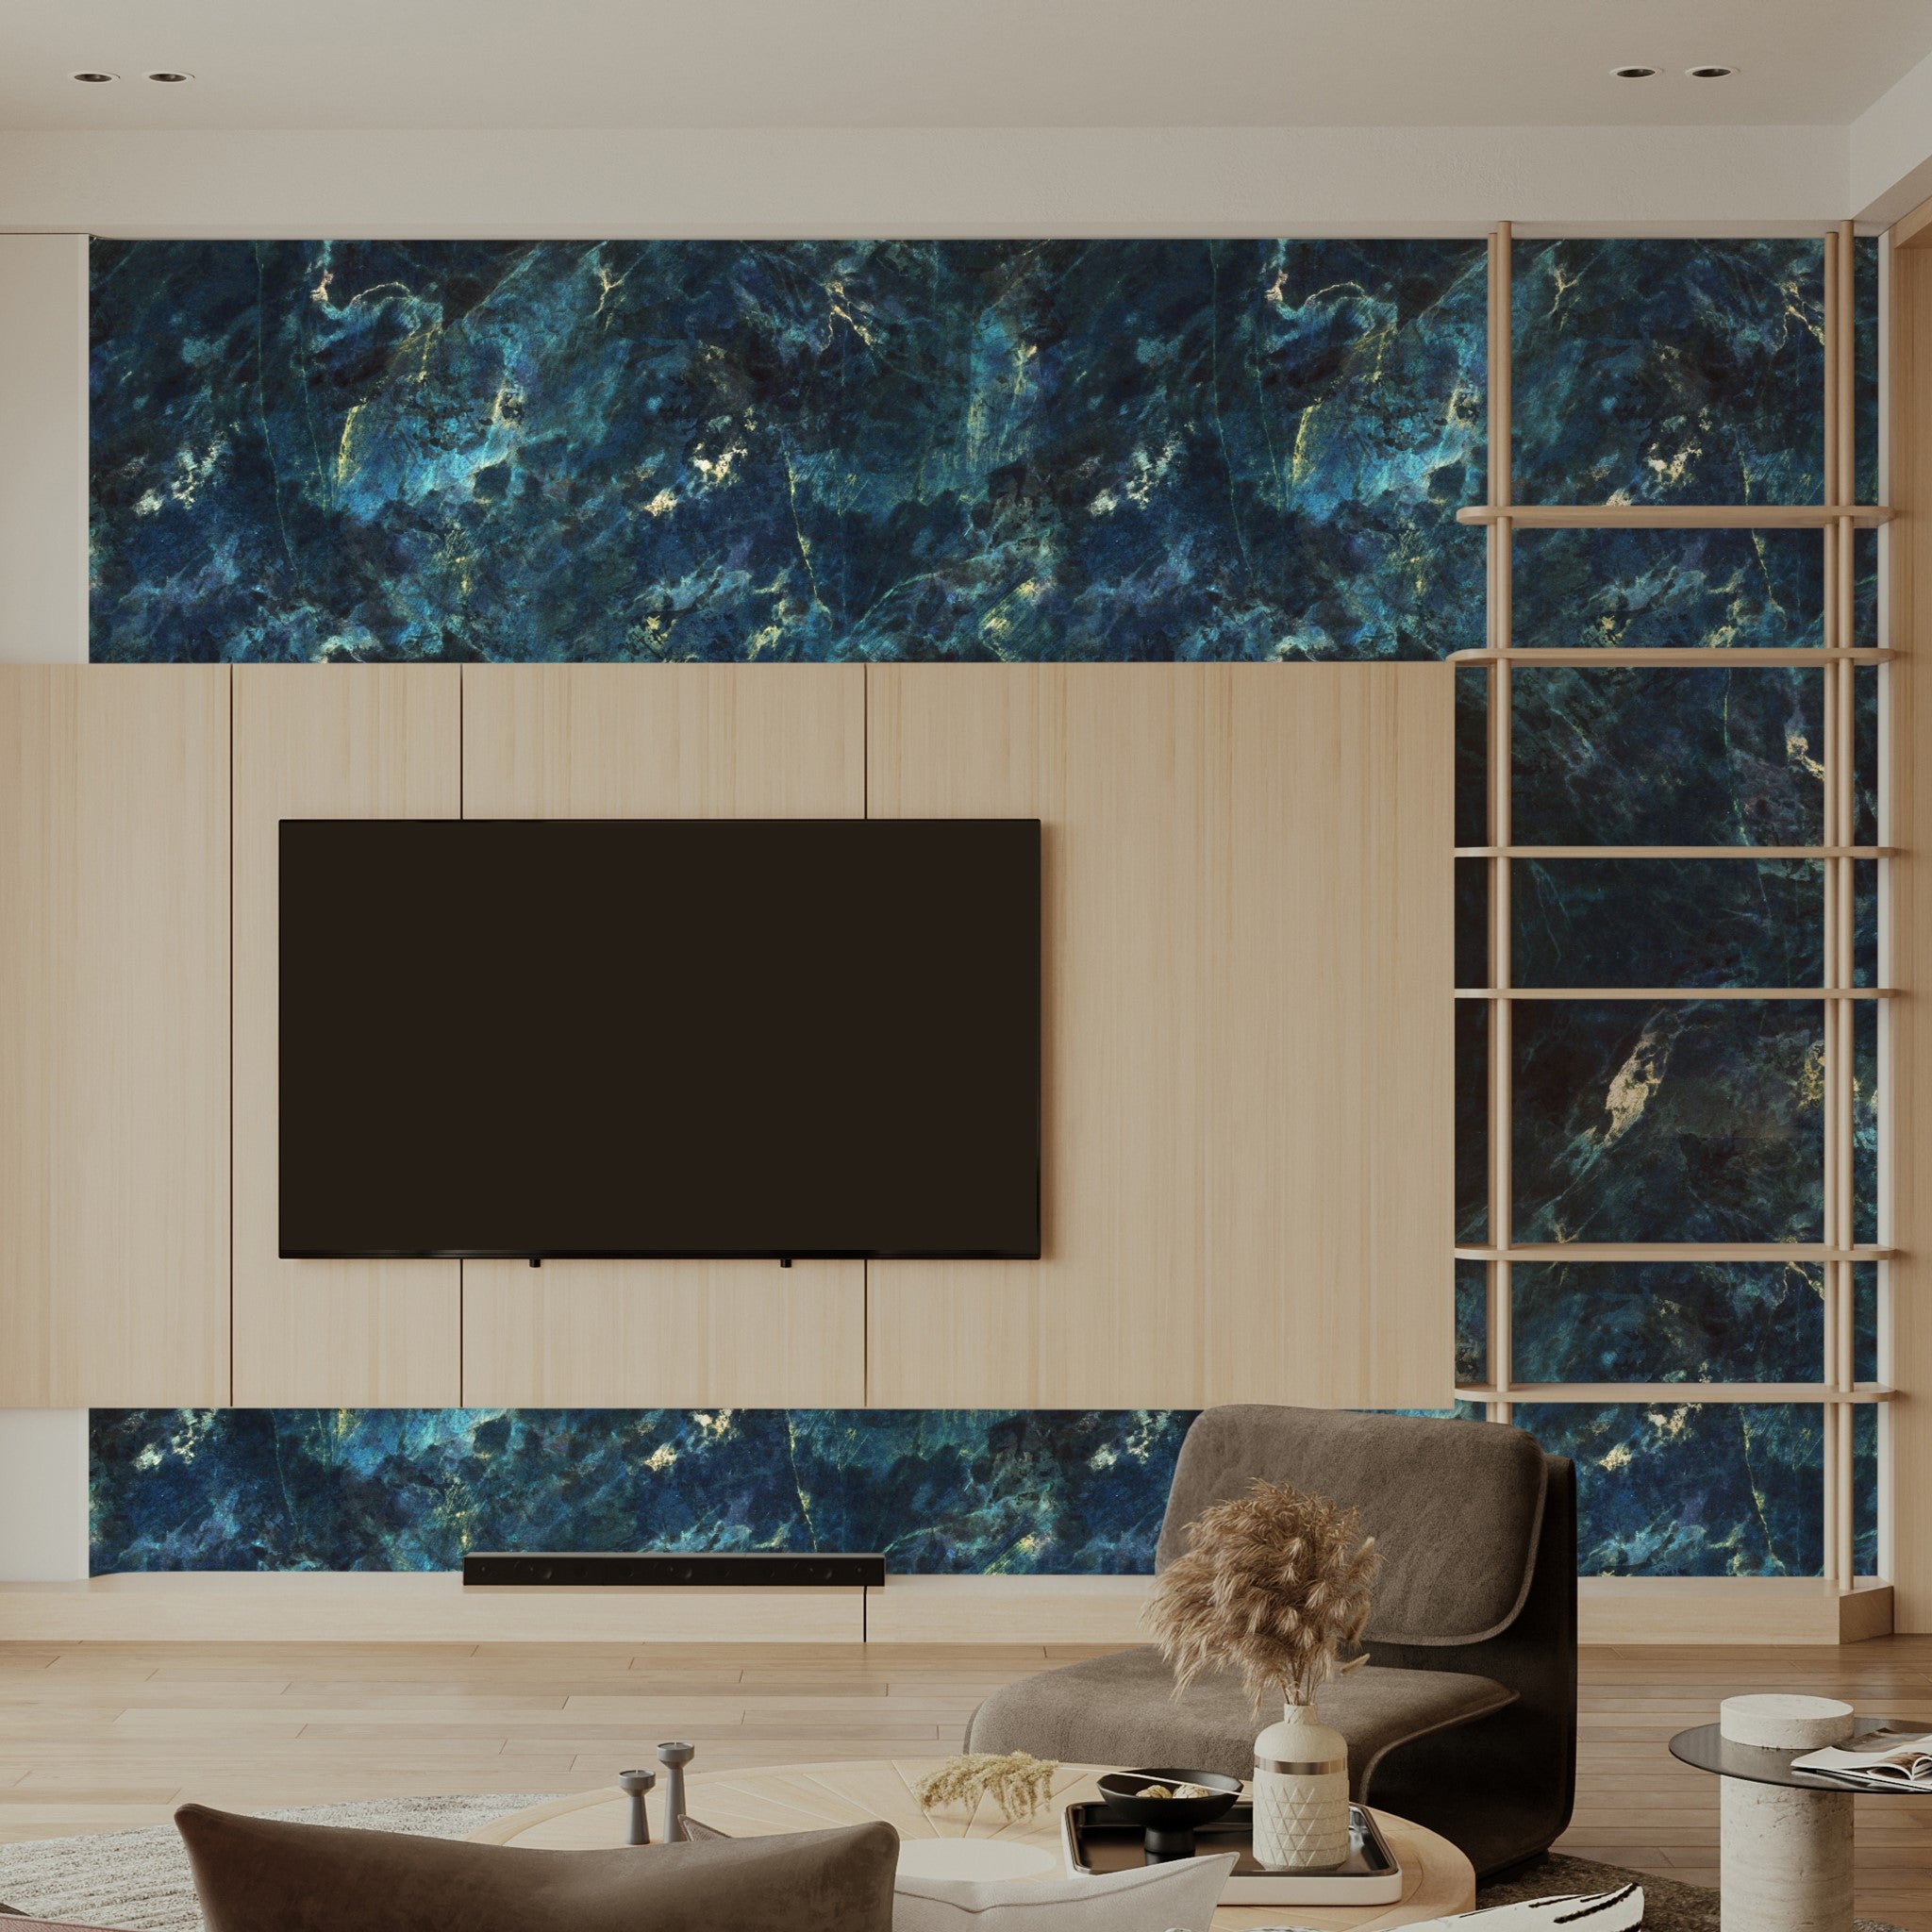 "Baudelaire Wallpaper by Wall Blush featured in modern living room, enhancing space with a vivid blue pattern focus."